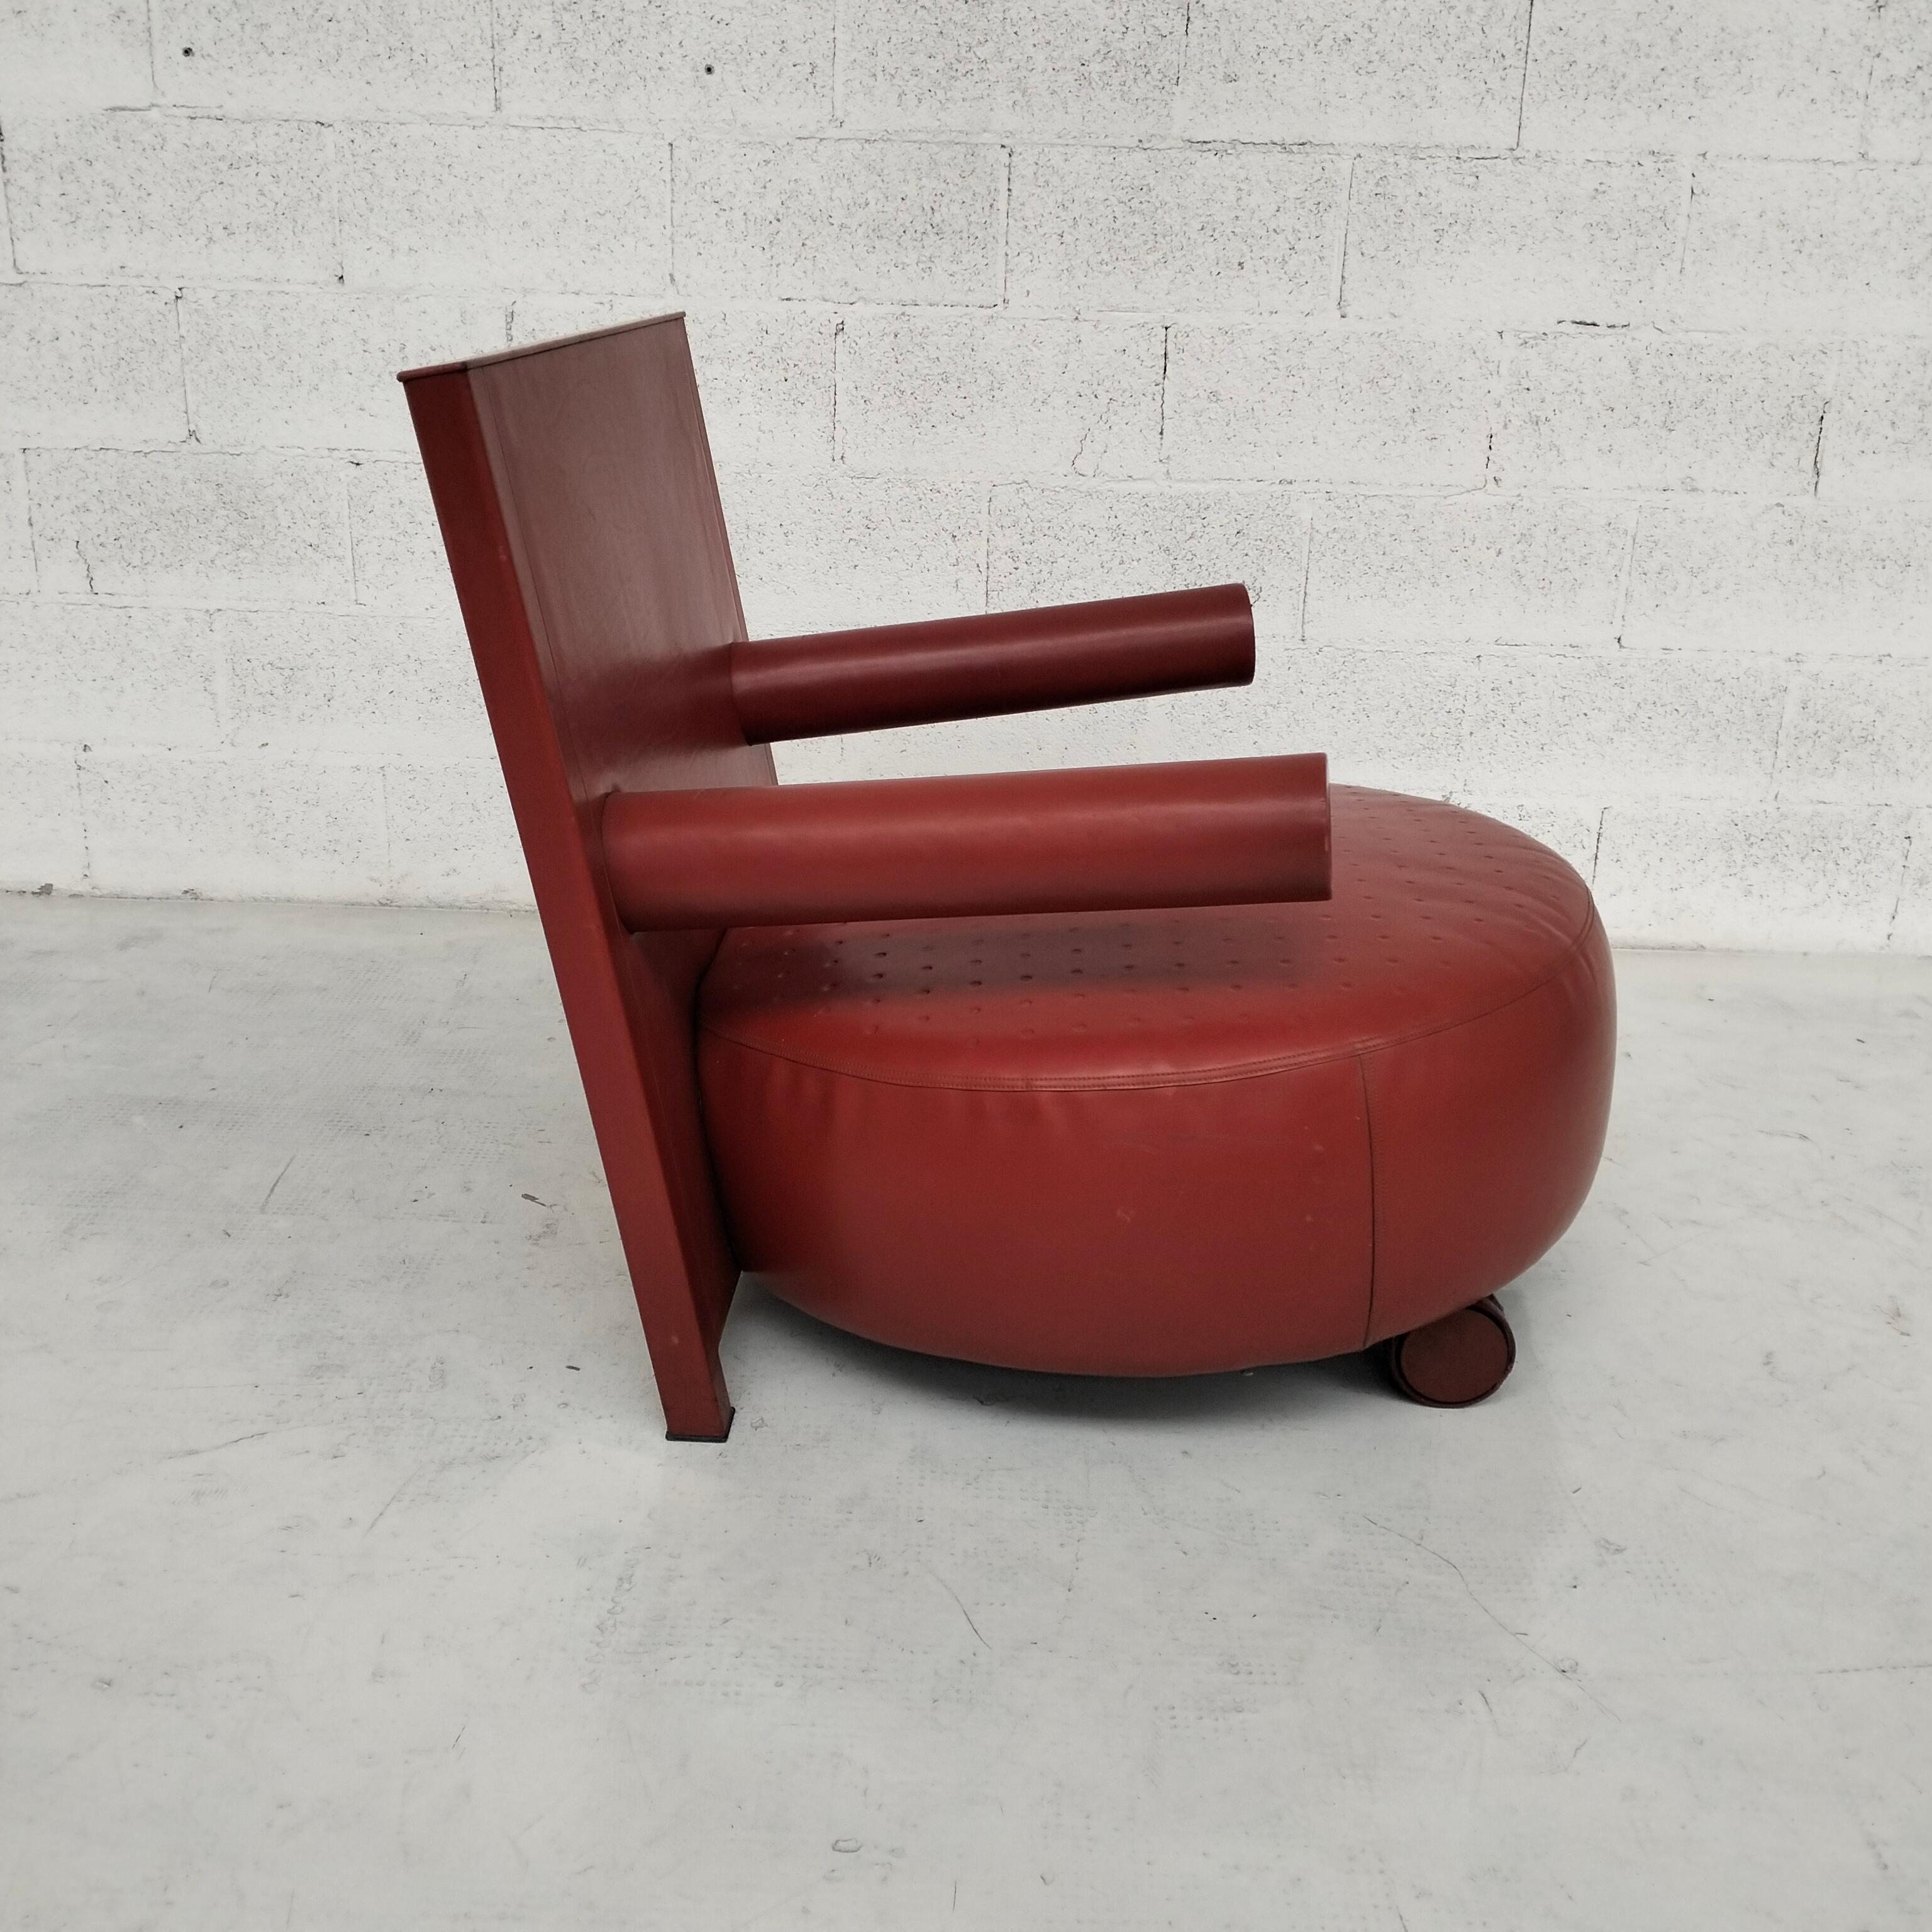 Baisity leather armchair by Antonio Citterio for B&B Italia - 1980’s For Sale 4